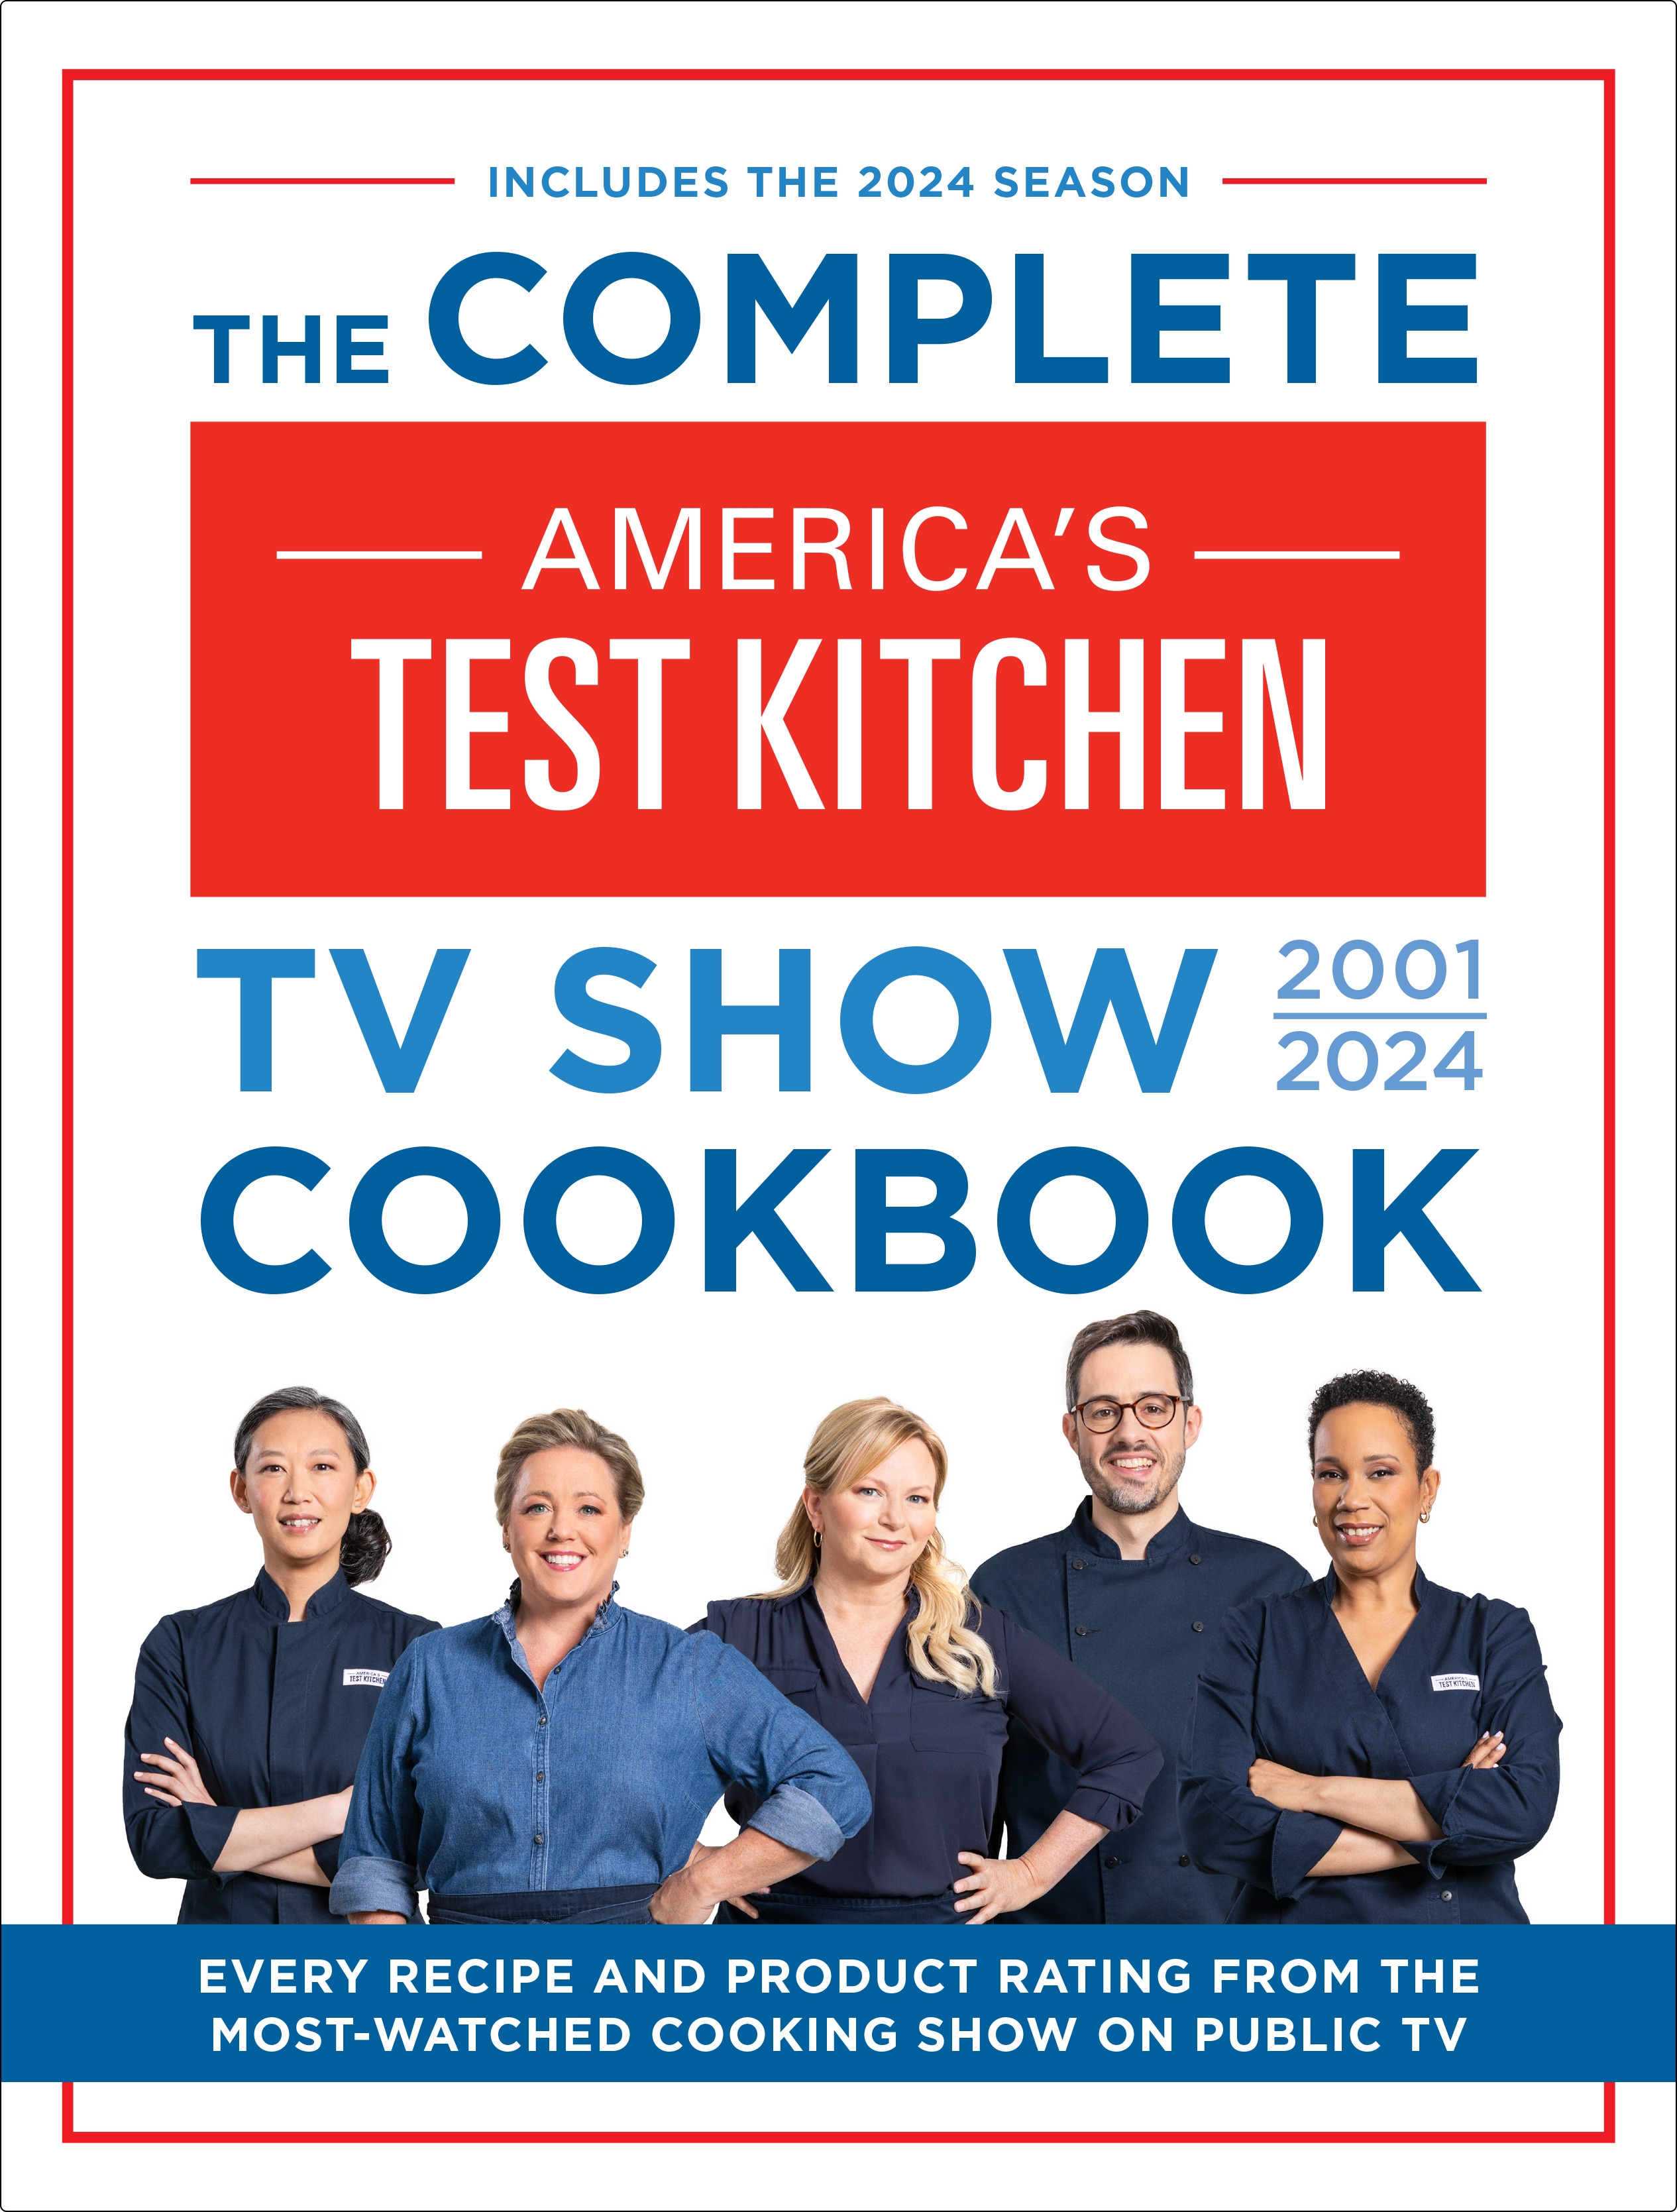 The Complete Americas Test Kitchen Tv Show Cookbook 20012024 By Americas Test Kitchen